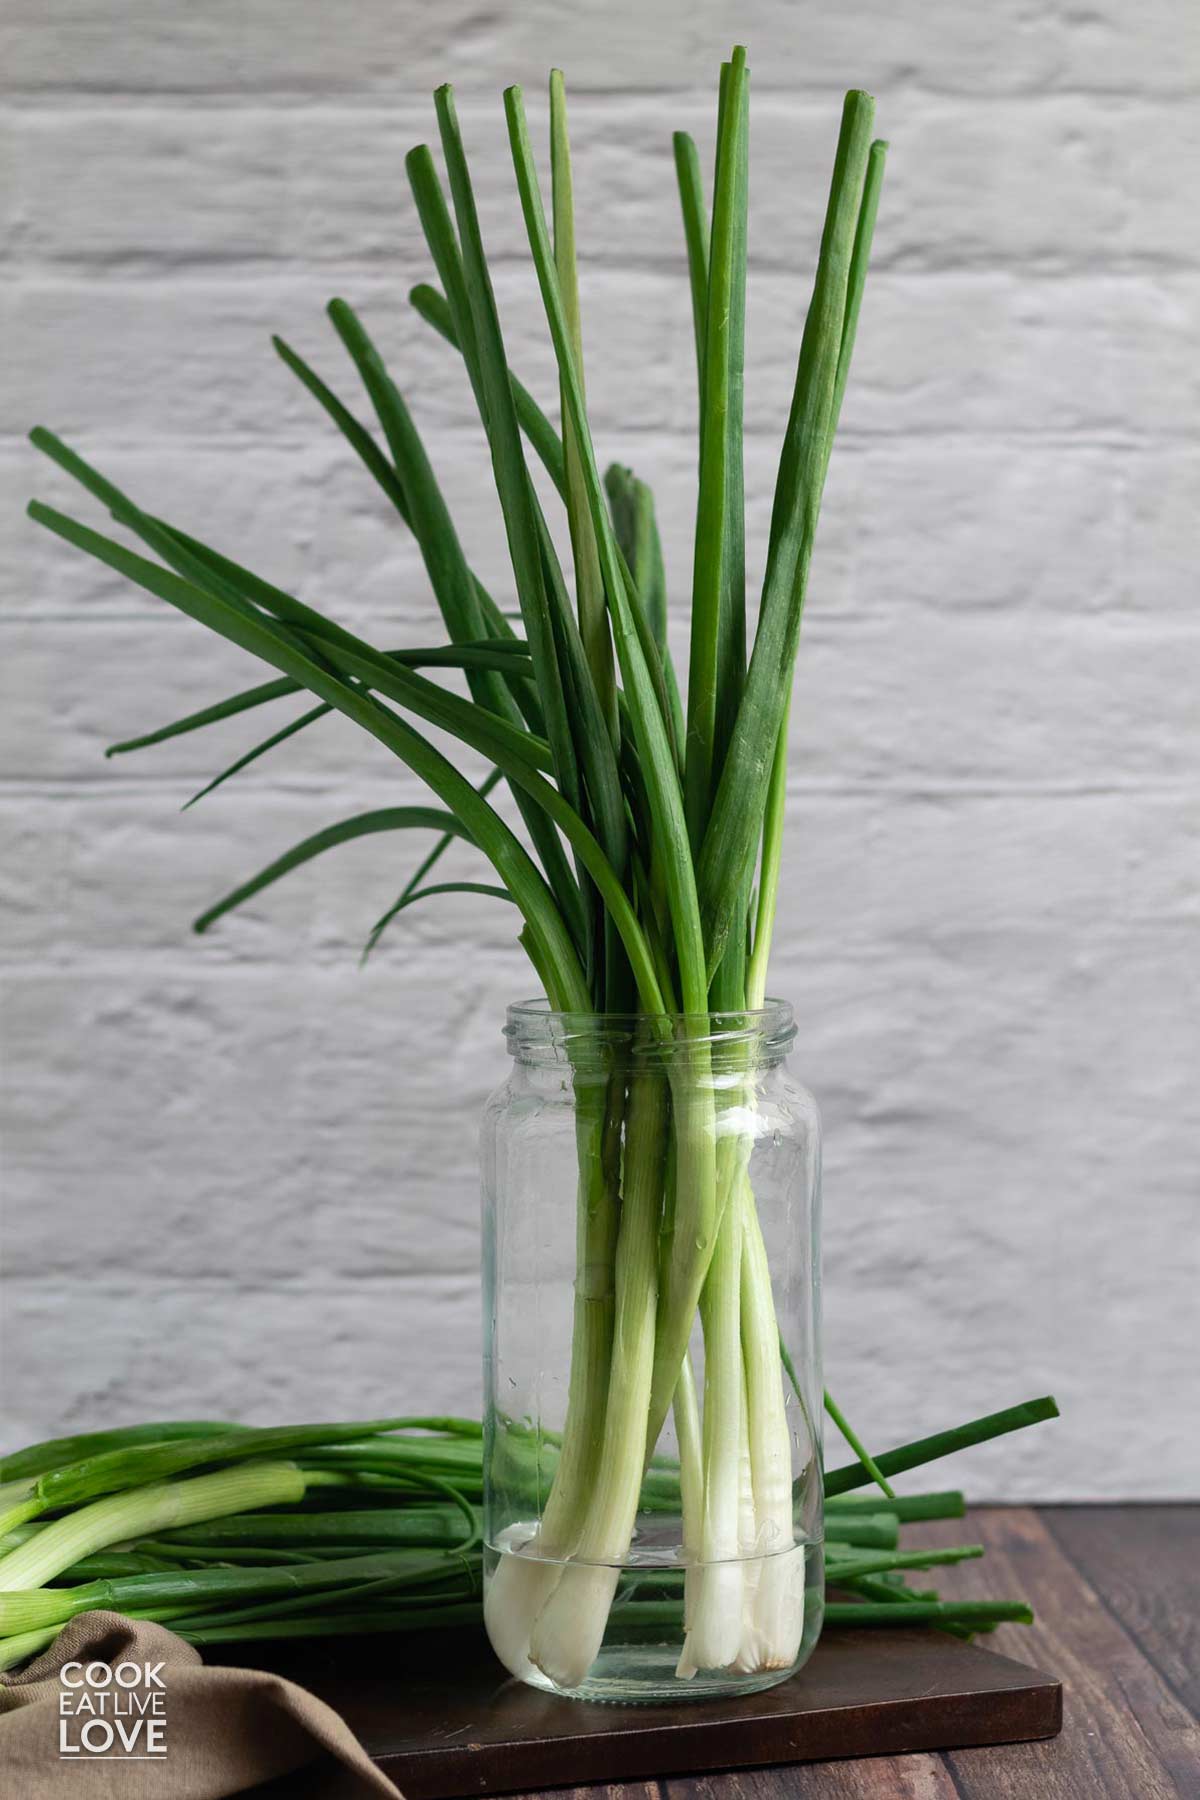 Green onions in a glass jar with water.